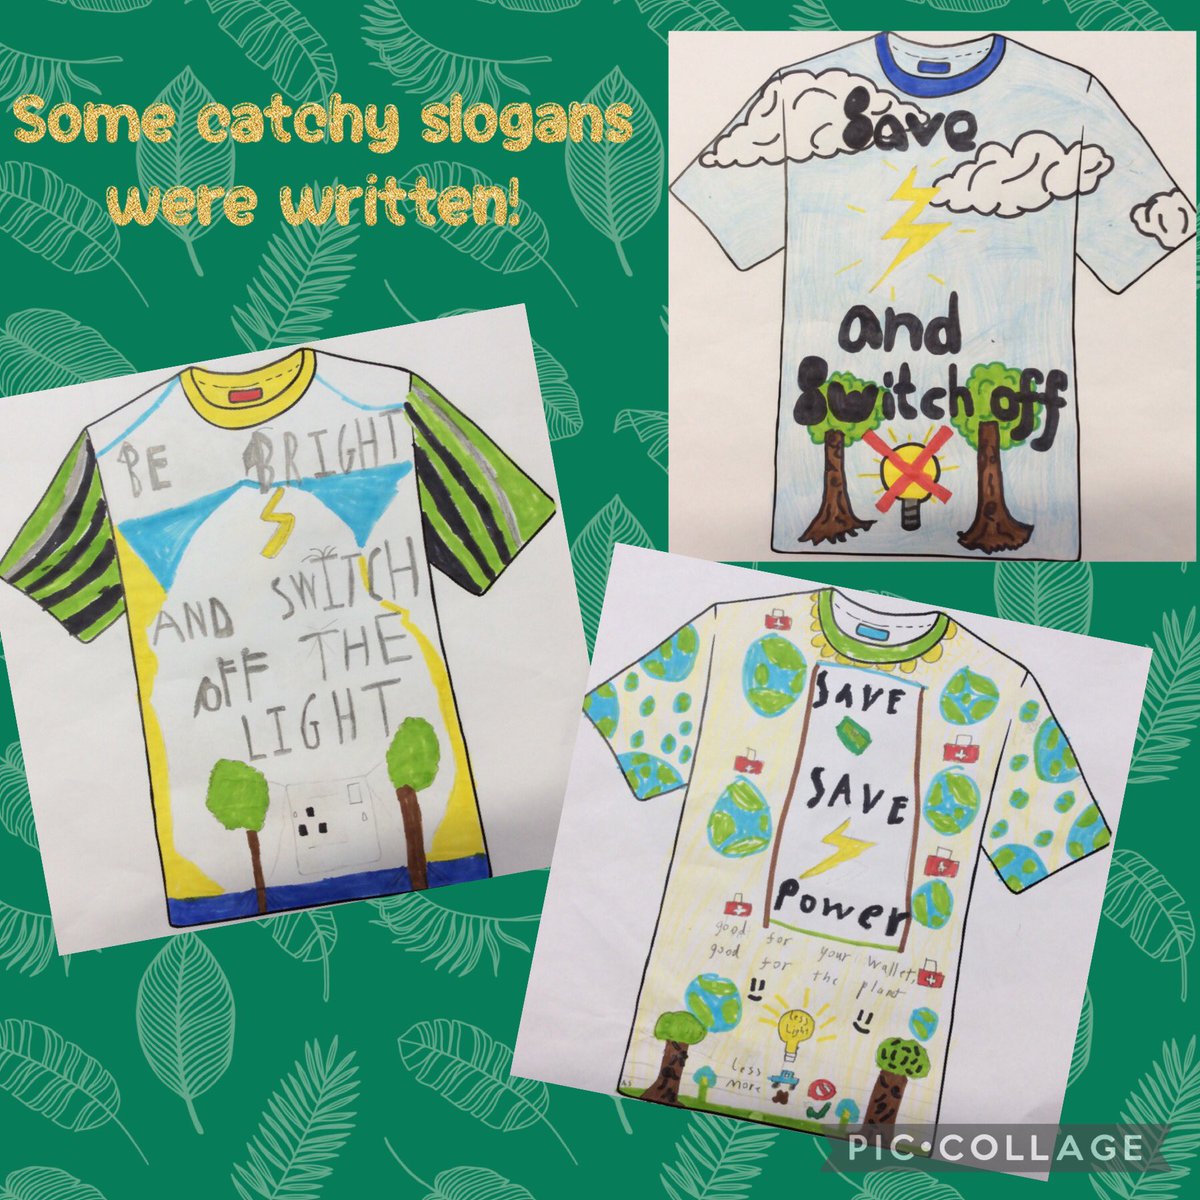 As part of ‘Switch off Fortnight’,Eco Warriors have designed amazing t-shirts for the @WBThePod competition! We incorporated our @EcoSchools values when creating our catchy slogans & images too🌍 We are excited to see if one of them will be chosen to be printed by @Teemillstore